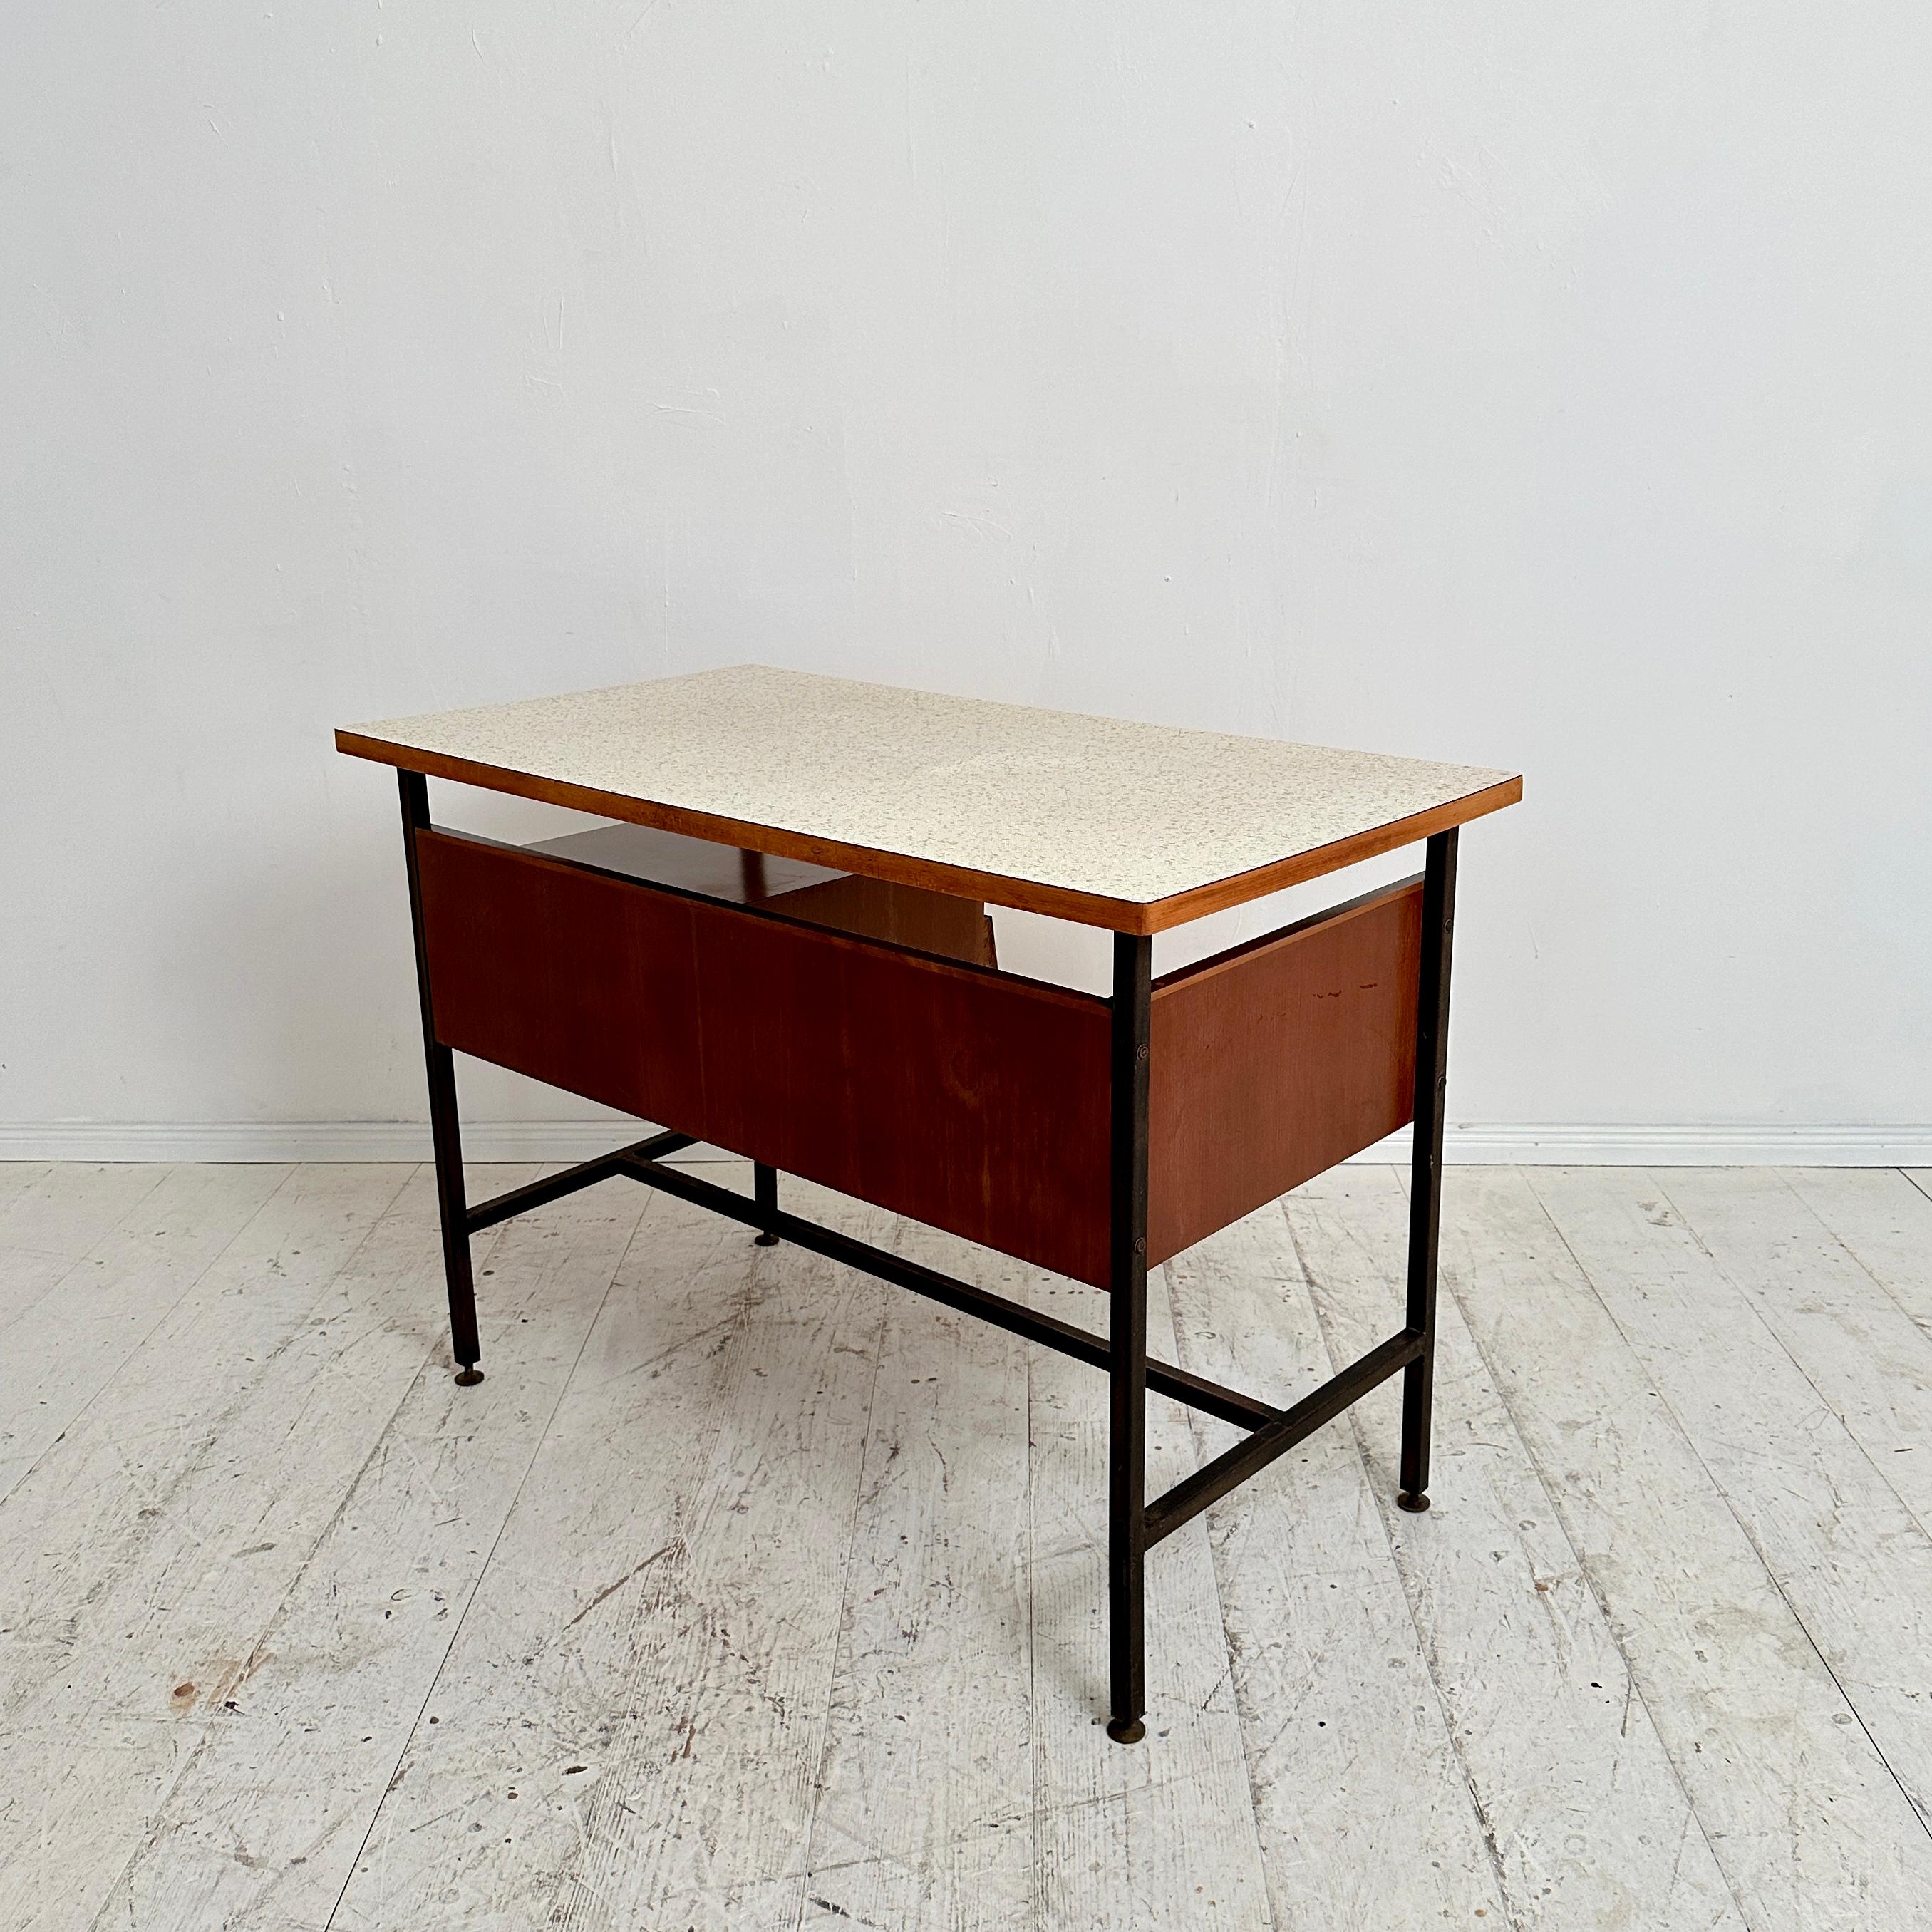 Small Mid Century Italian Desk in Metal, Walnut and Formica, around 1950 For Sale 10